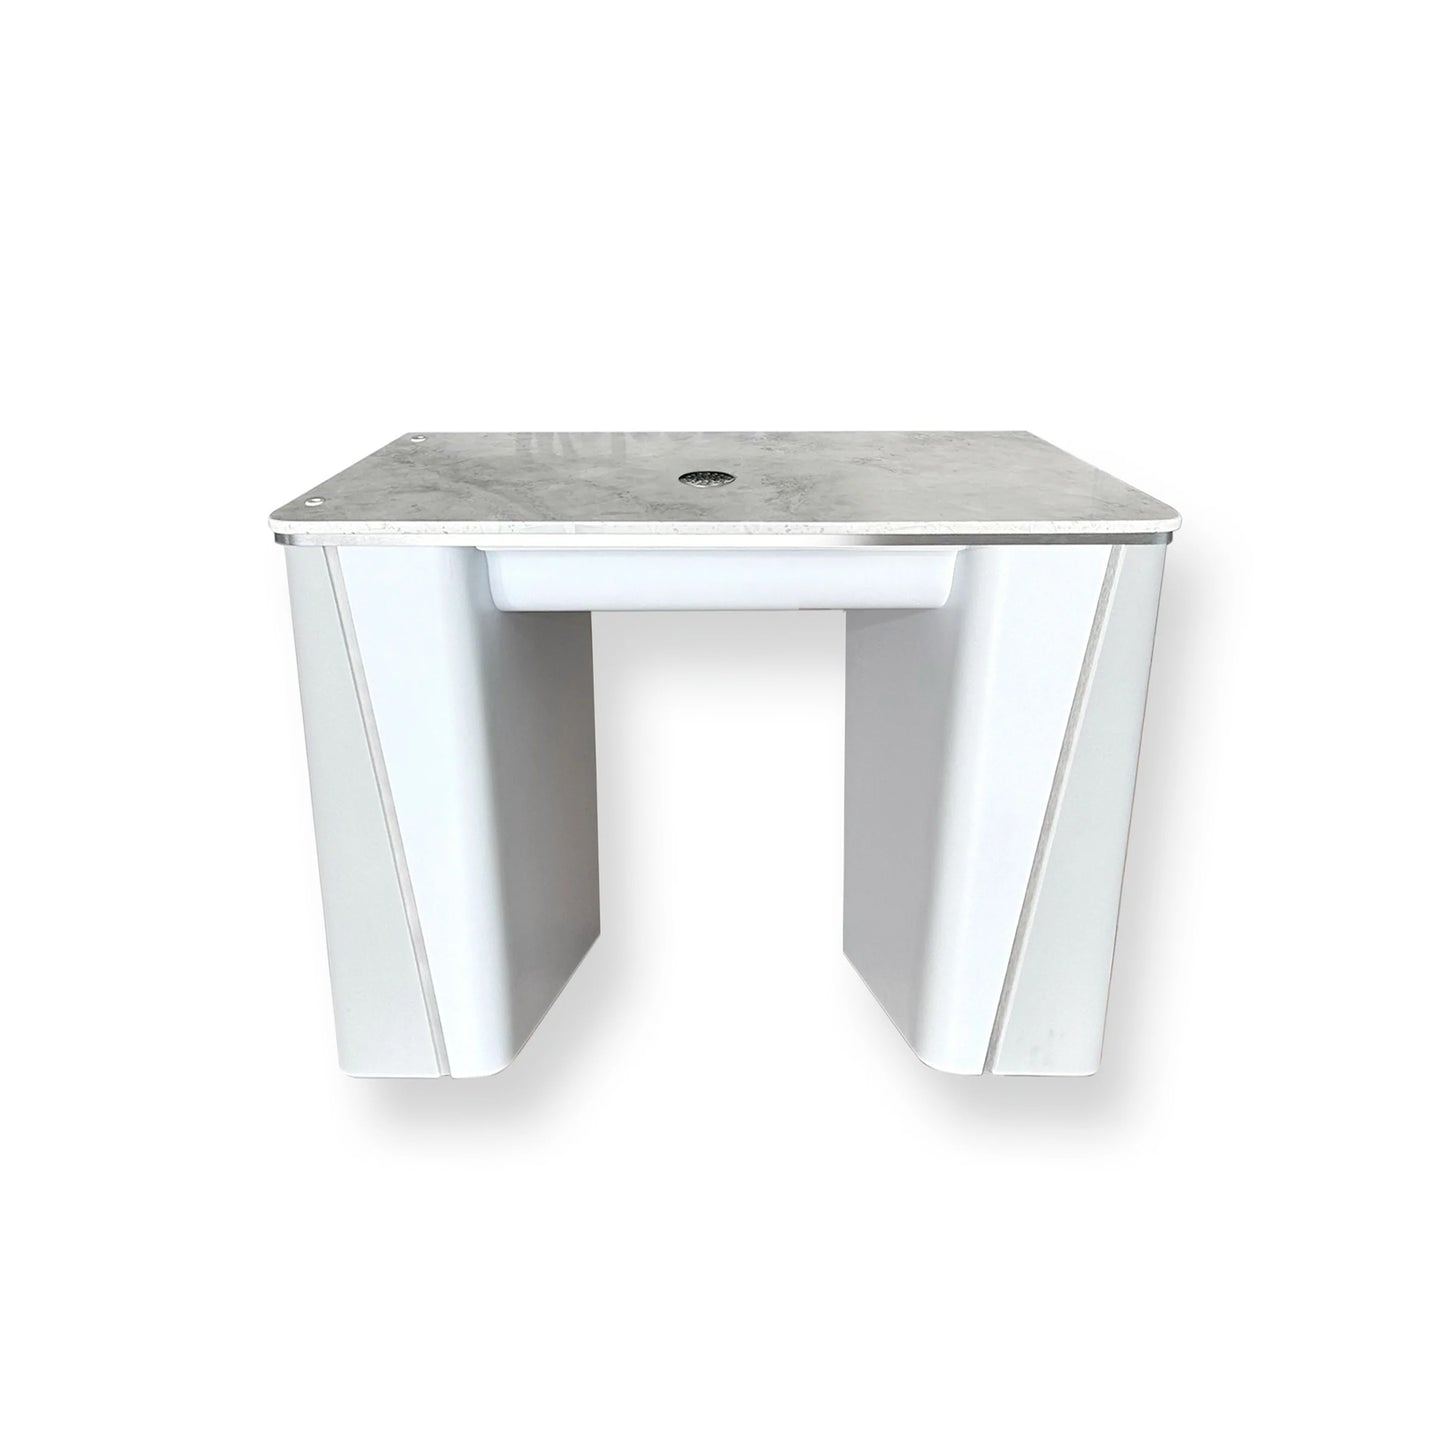 Benjamine Single Nail table with Vent Pipe